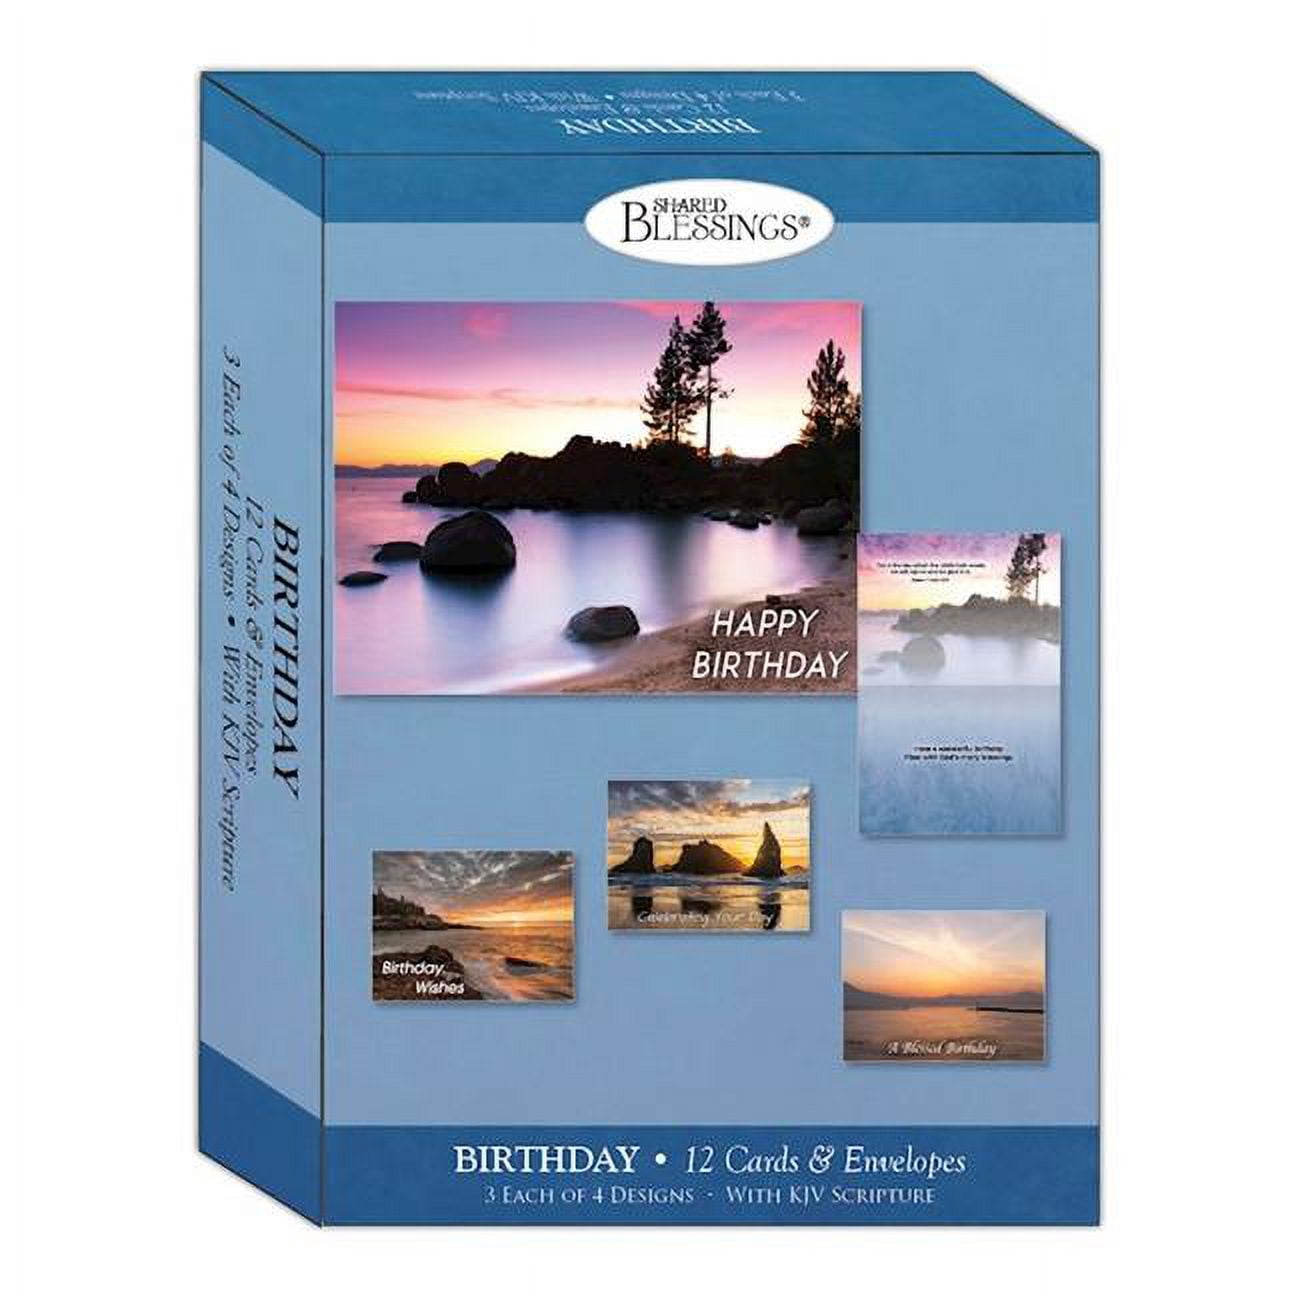 Picture of Crown Point Graphics 309281 Birthday on The Shore Shared Blessings Boxed Card - Box of 12